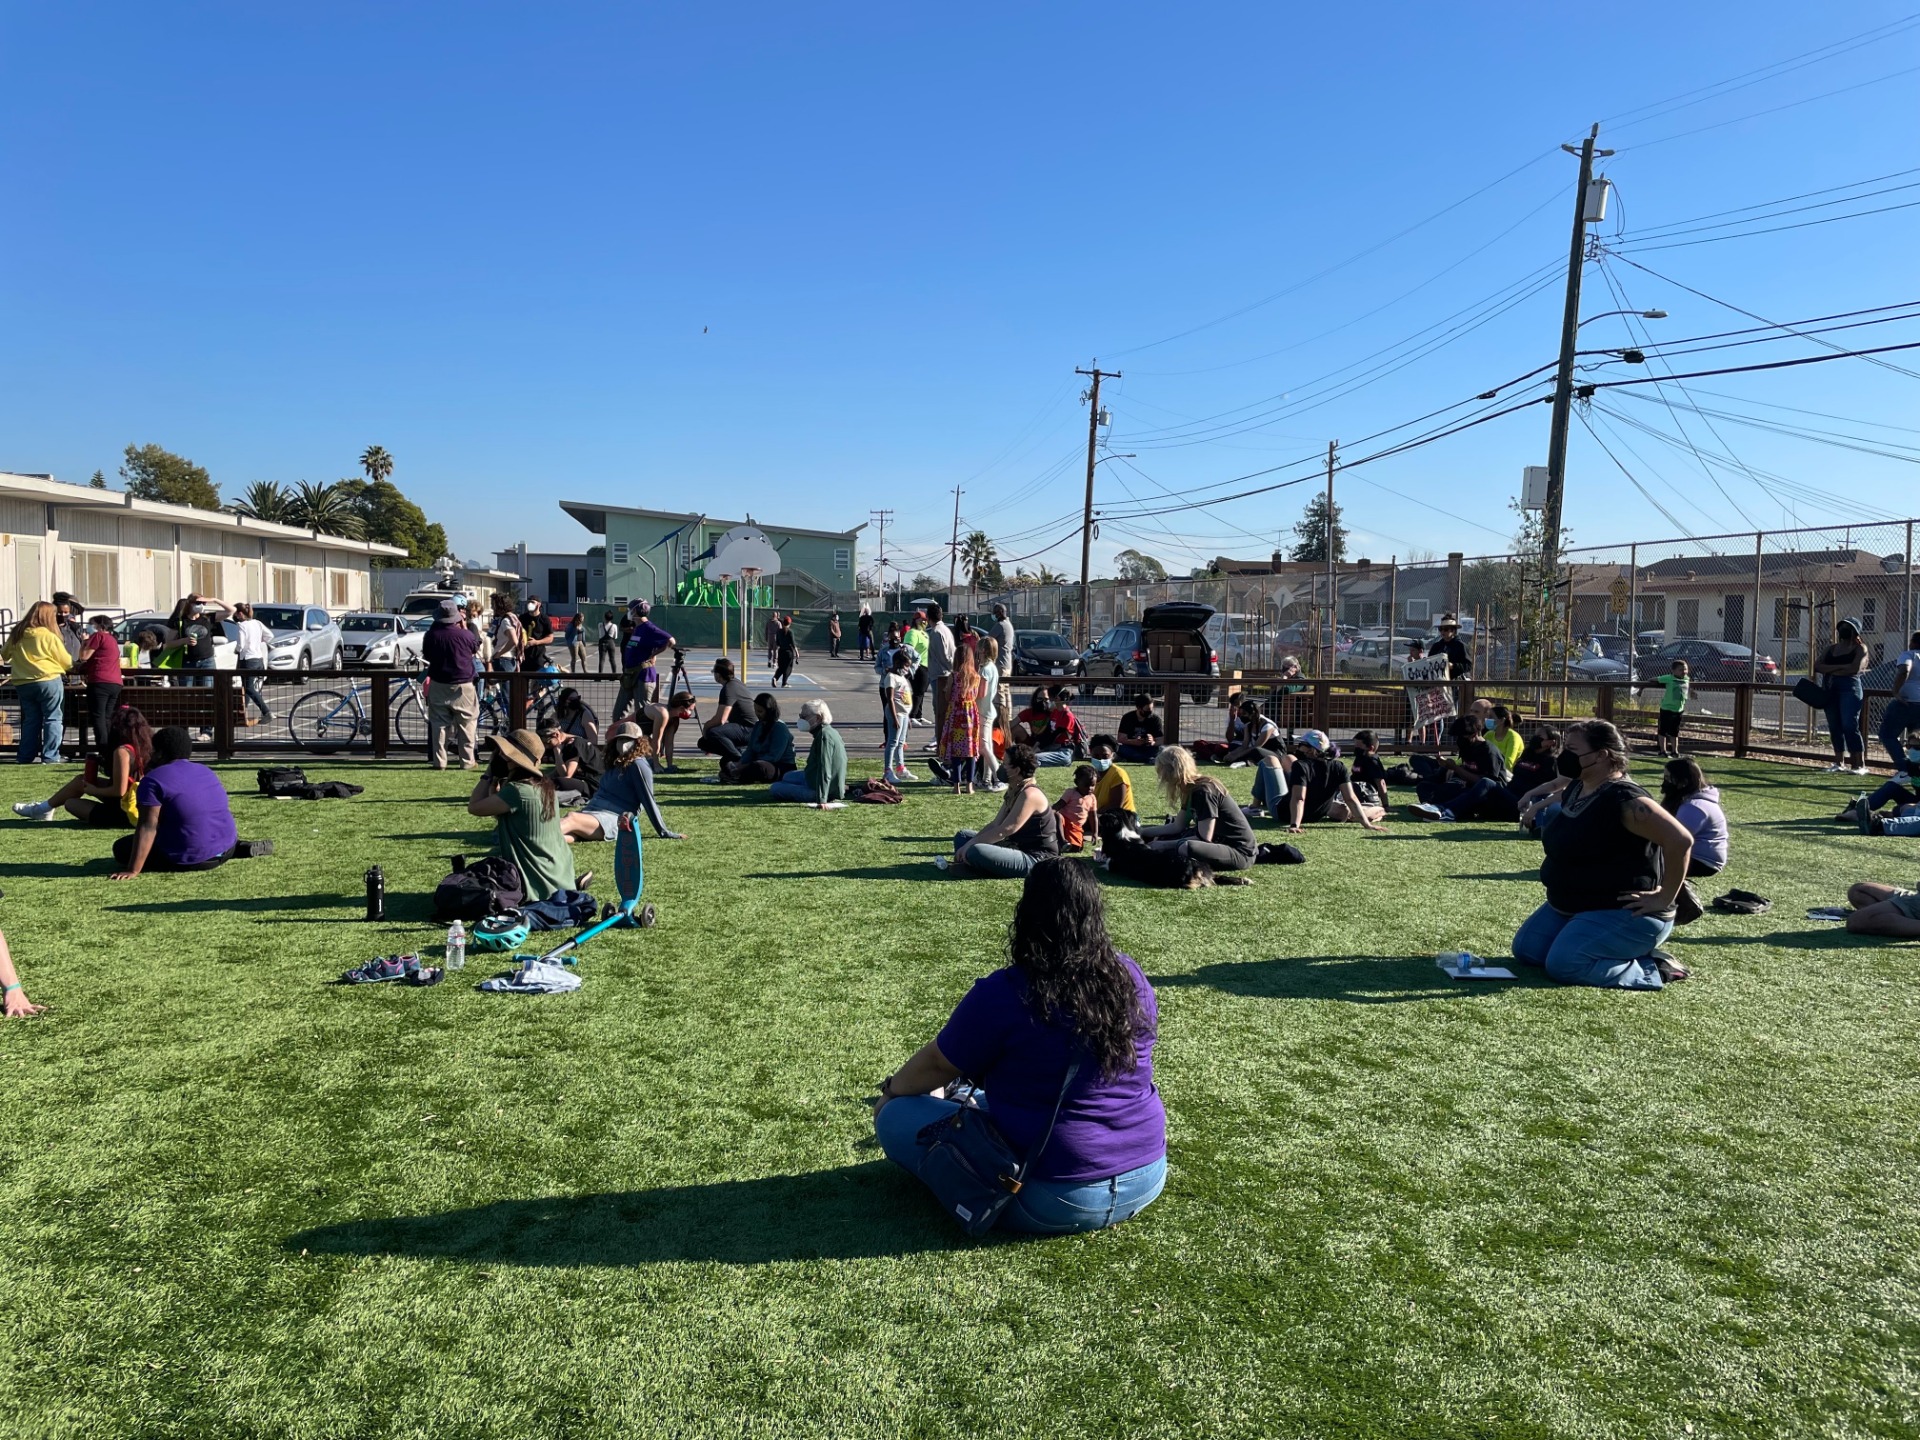 A few dozen people sit in the grass, many cross-legged, facing a speaker that is off-camera. A baskteball court and the street can be seen in the background.